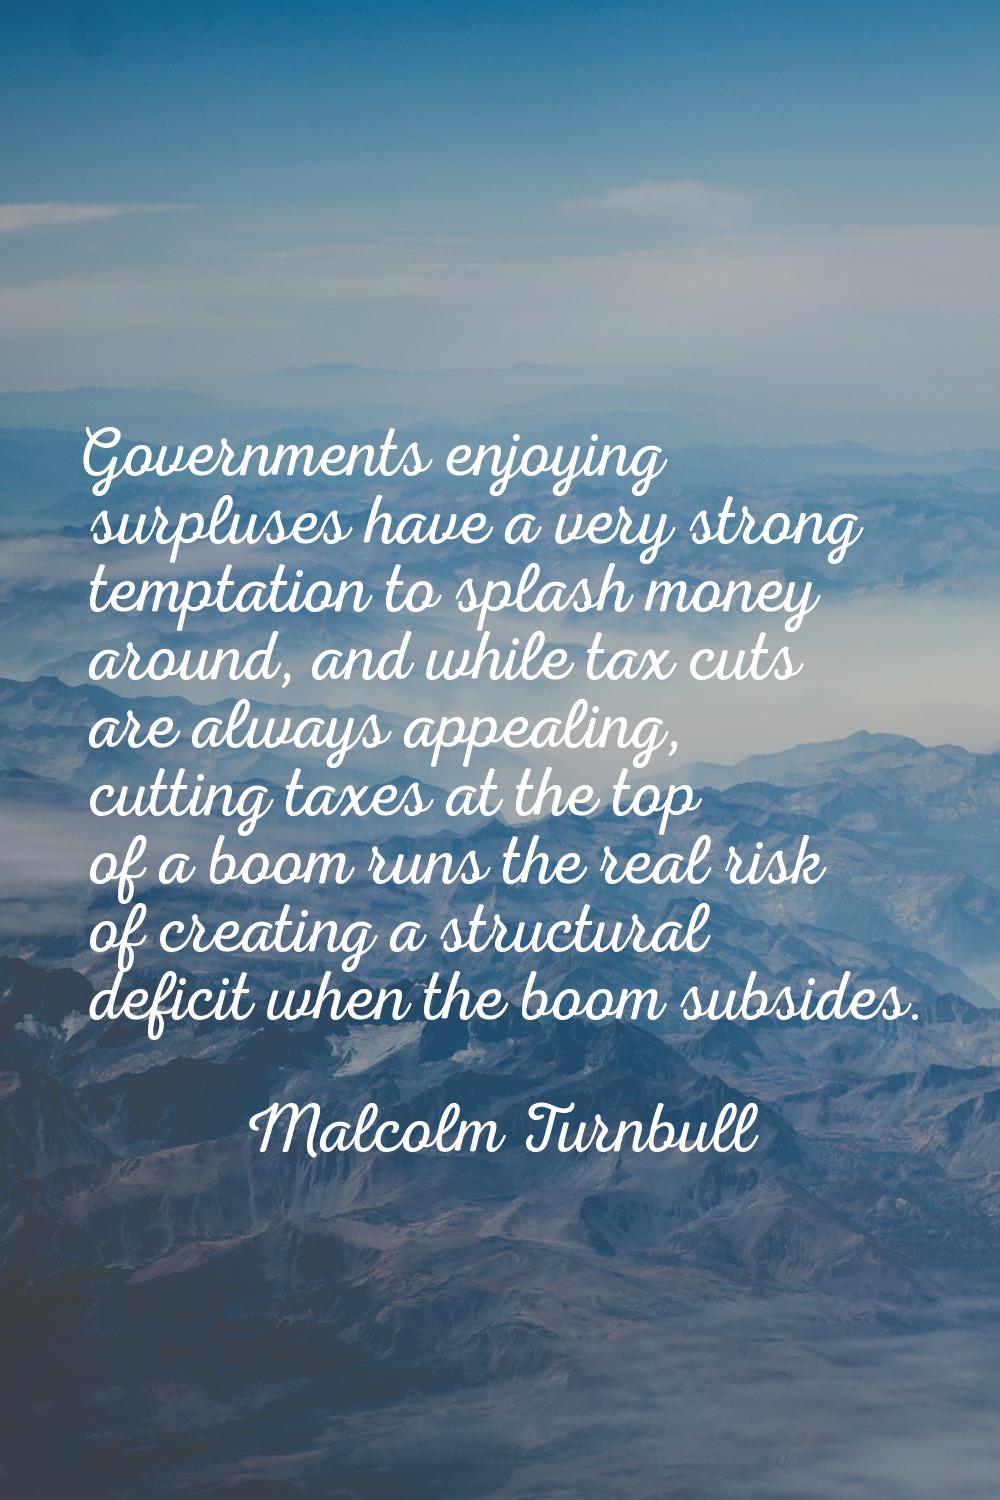 Governments enjoying surpluses have a very strong temptation to splash money around, and while tax 